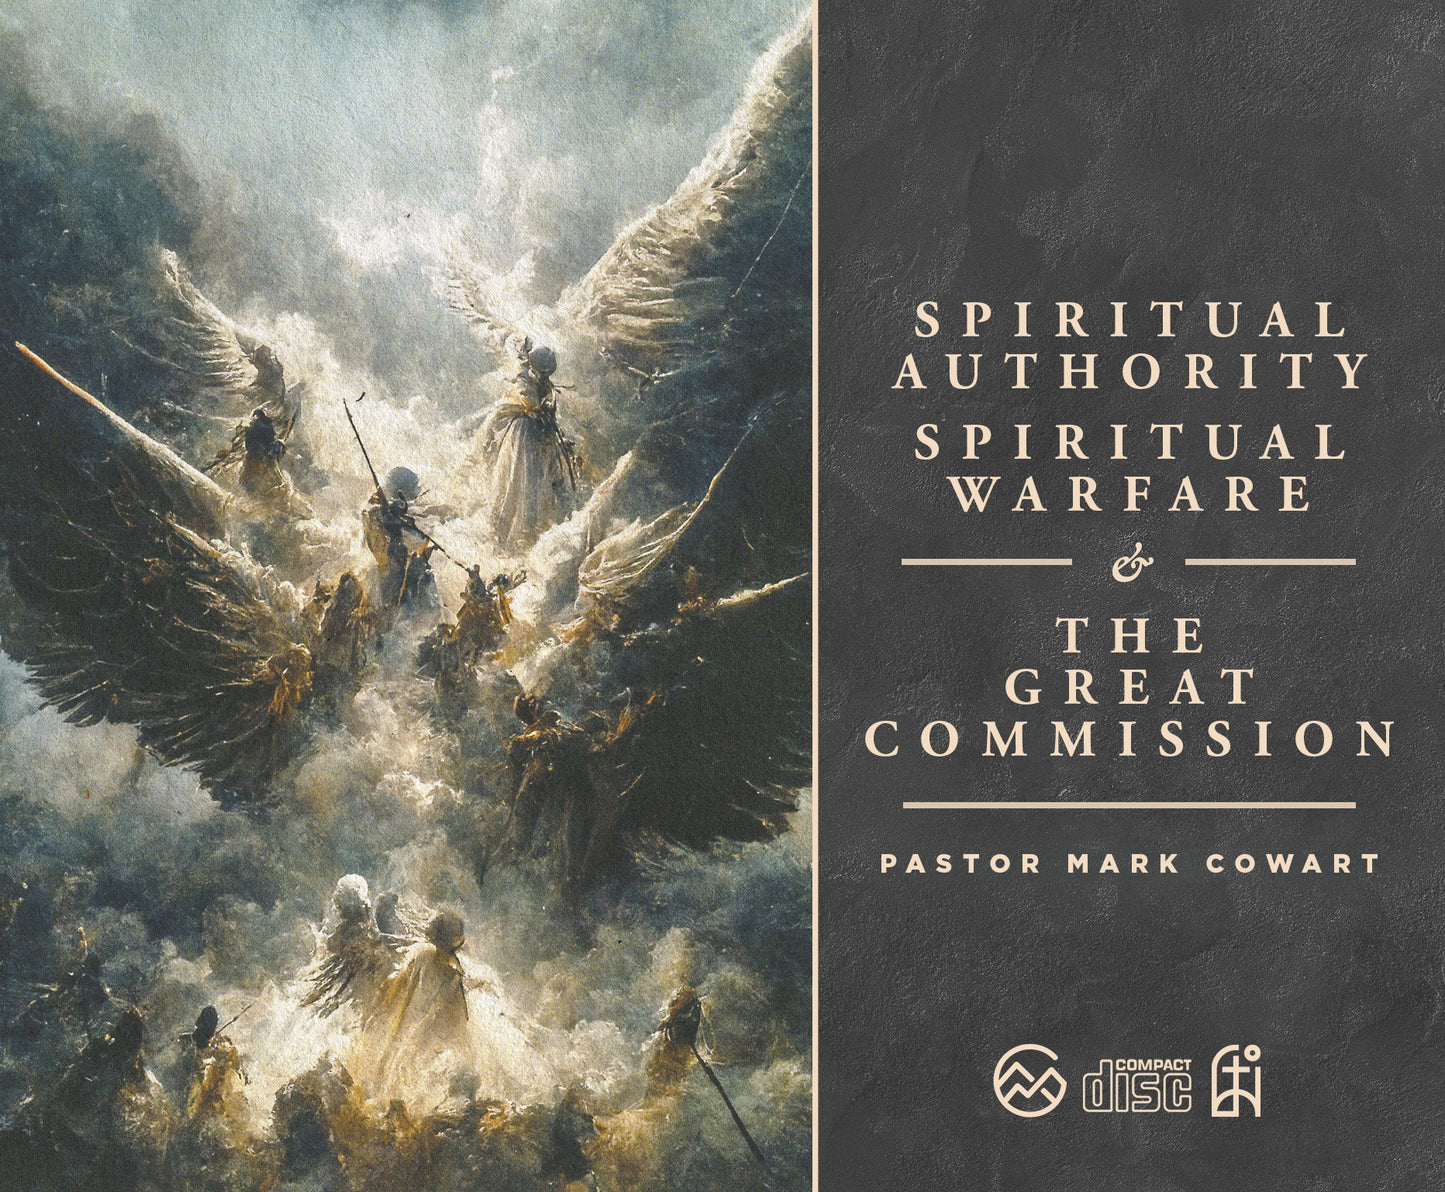 Spiritual Authority, Spiritual Warfare, and the Great Commission